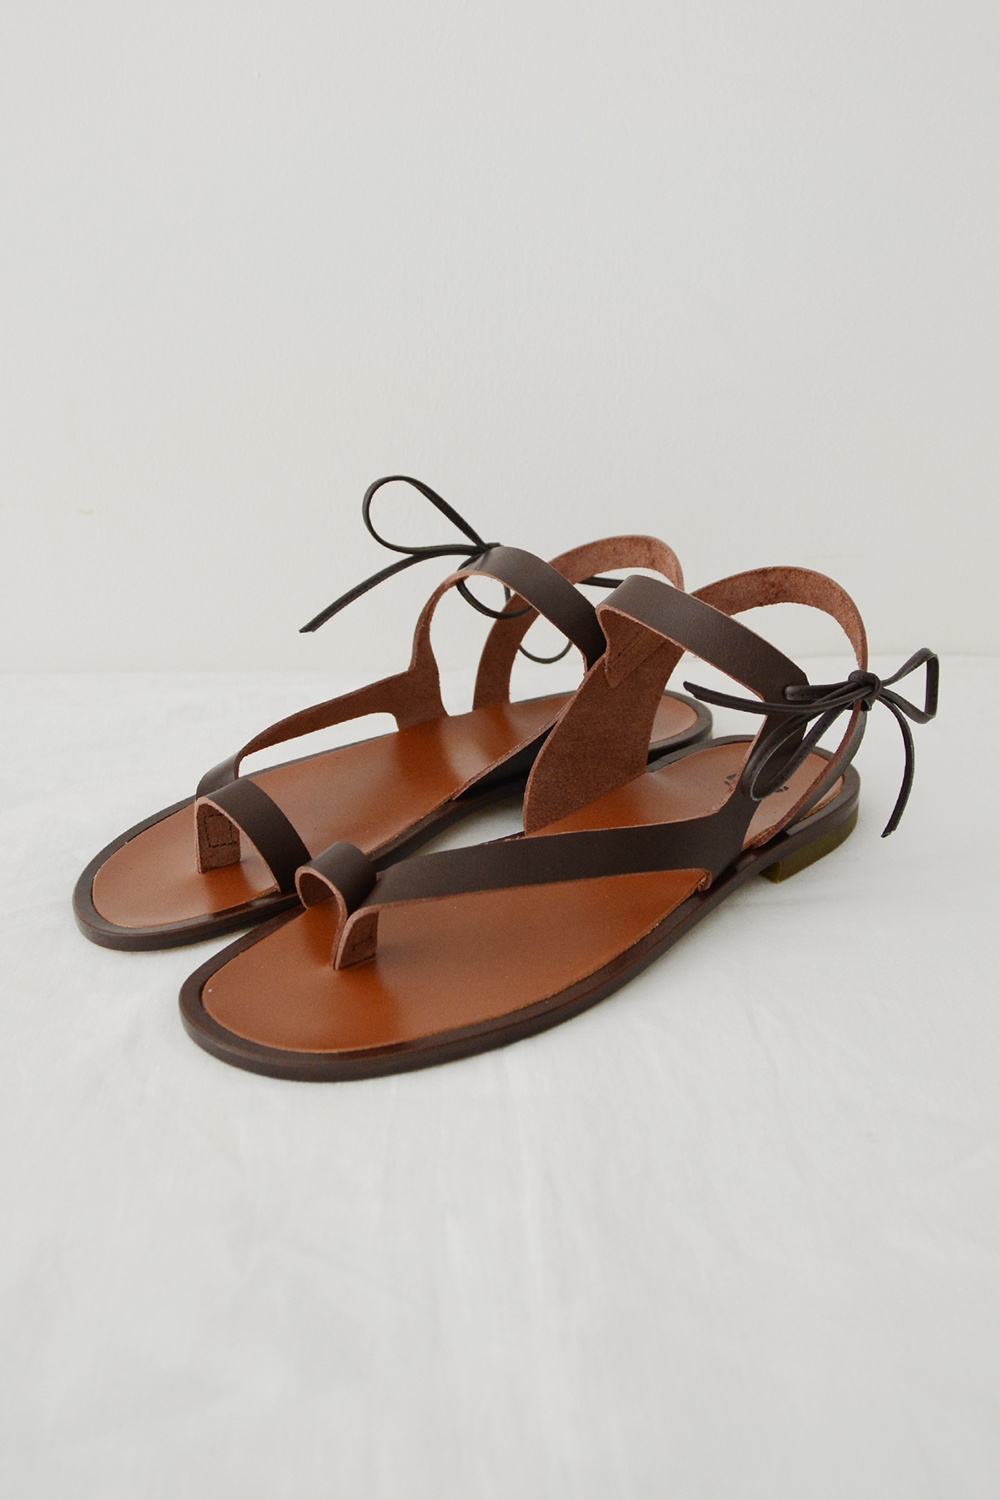 PePe Women's Sandal Brown Top Picture